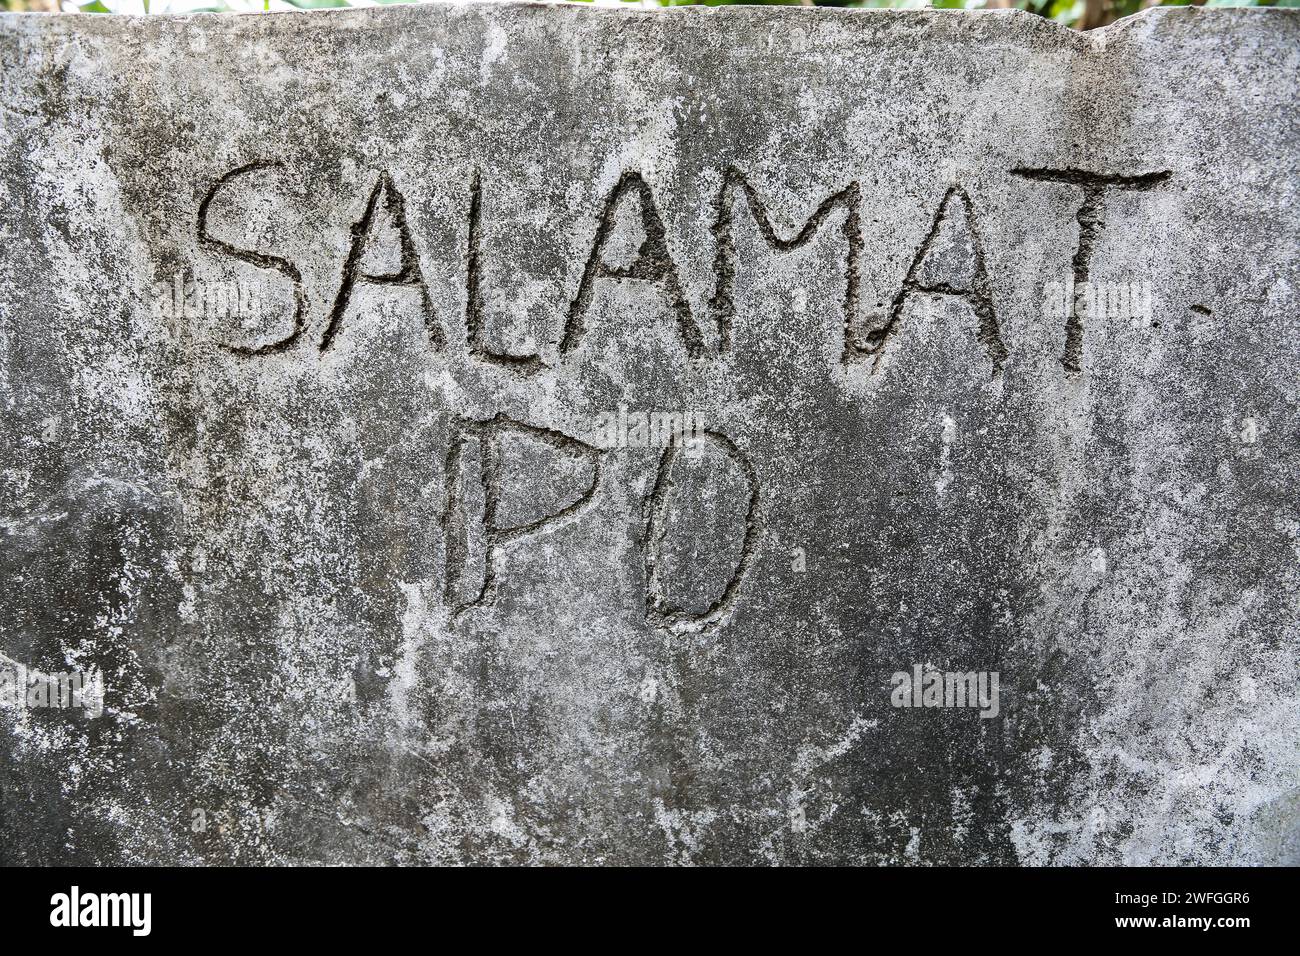 Wall engraved 'Salamat po' meaning thank you in Tagalog, official language (with English) spoken in the Philippines, thanks the visitors of a barangay Stock Photo